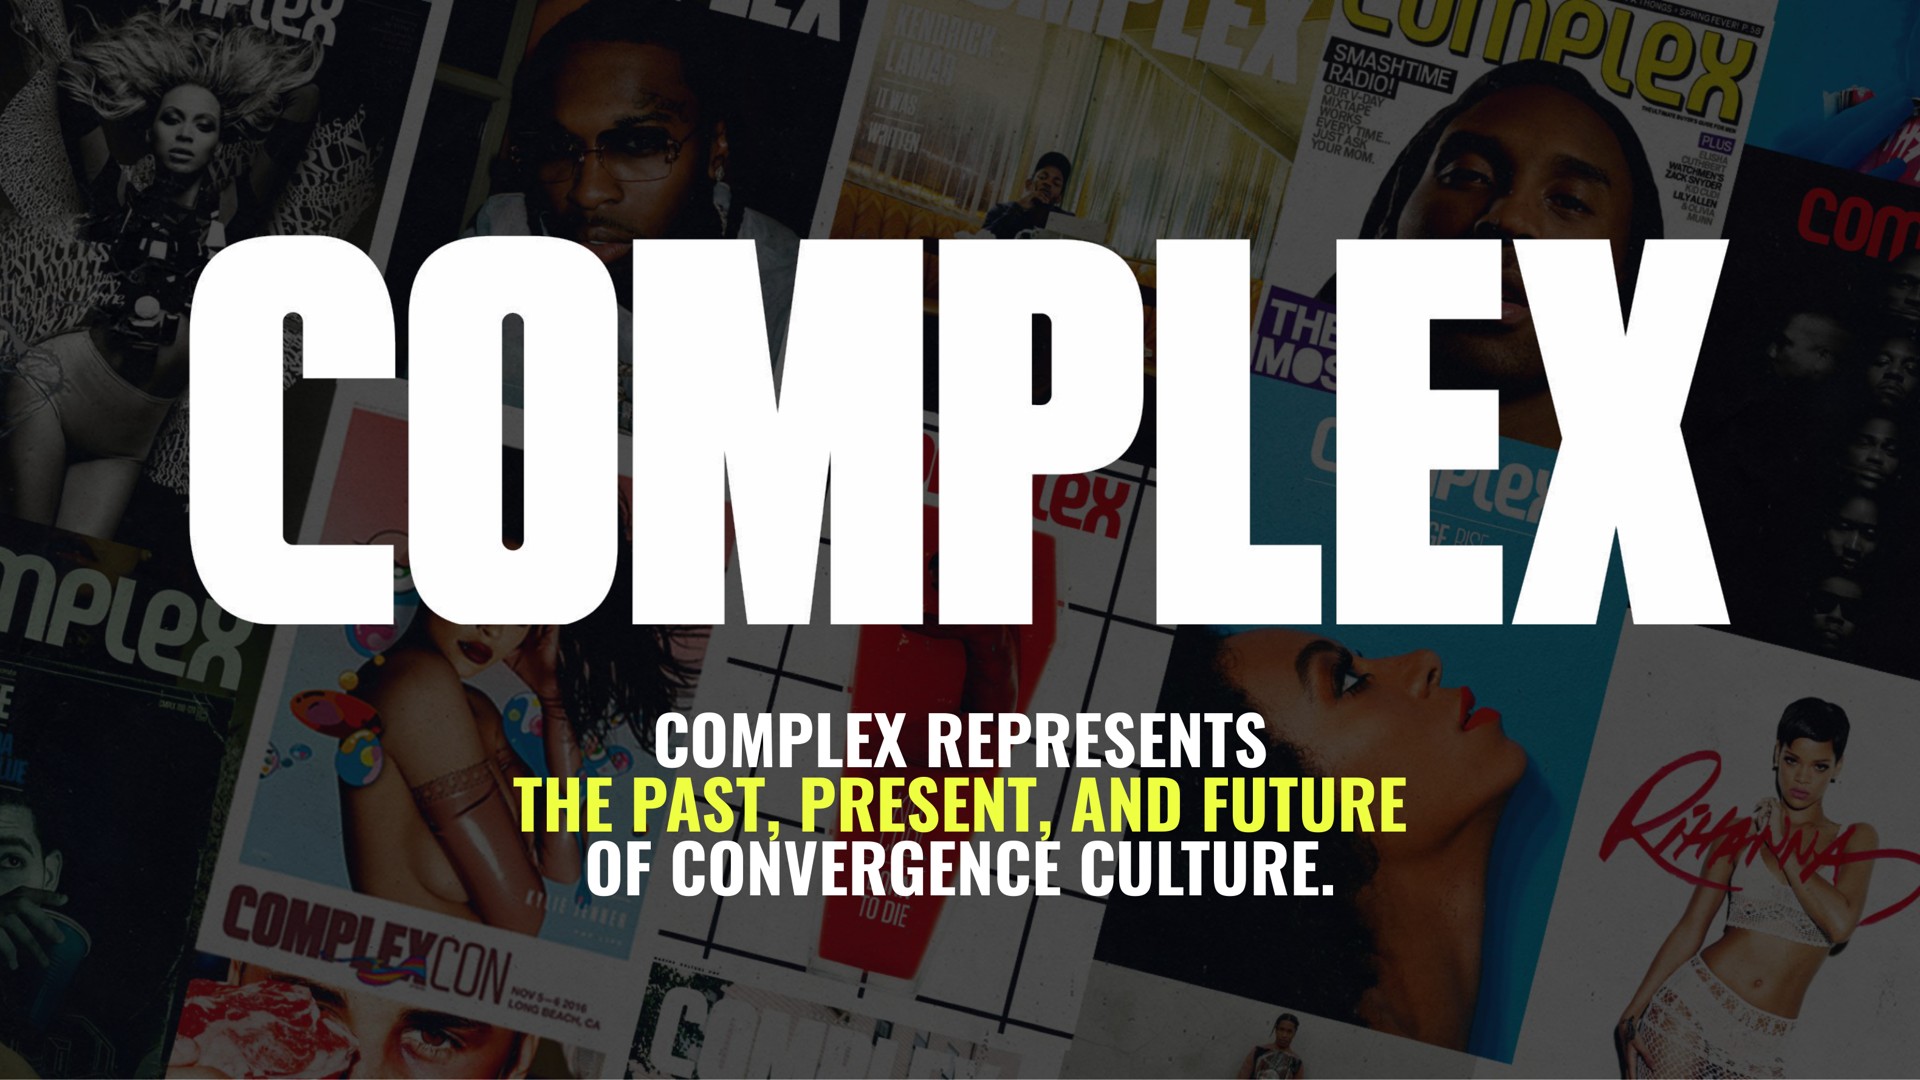 complex represents the past present and future of convergence culture we ace | BuzzFeed